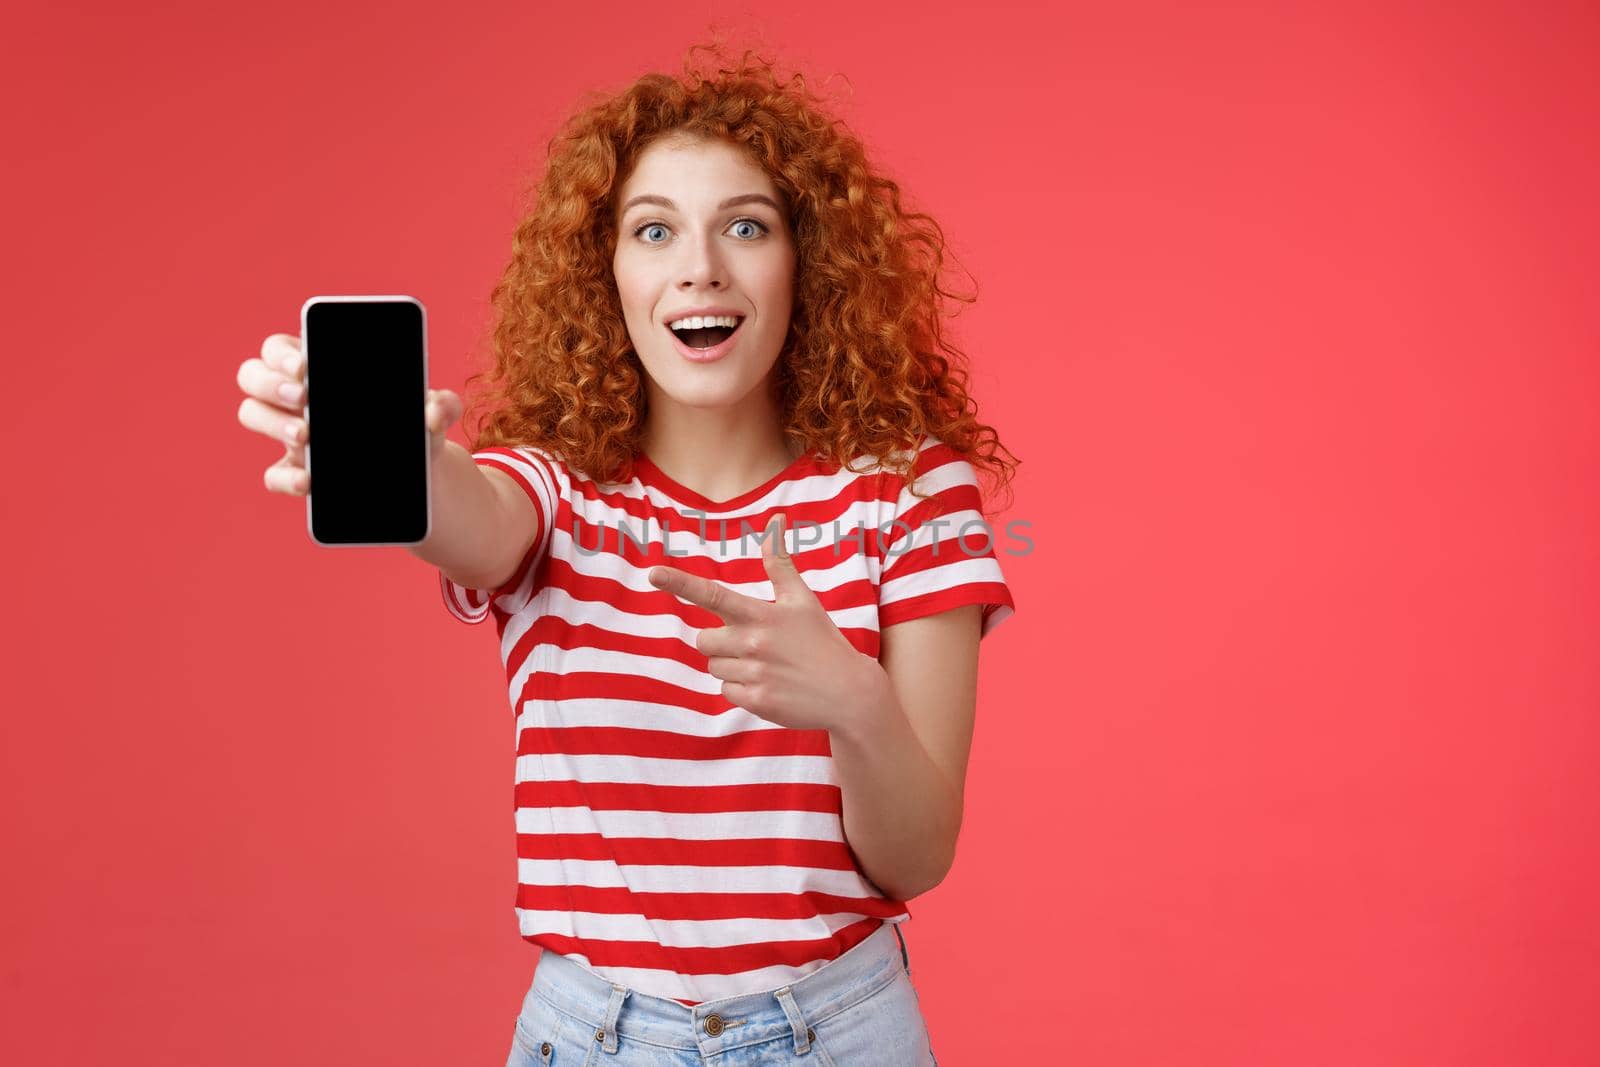 Take look what awesome smartphone. Impressed excited good-looking female love digital innovations redhead girl curly hairstyle showing phone screen pointing display promote cool app.